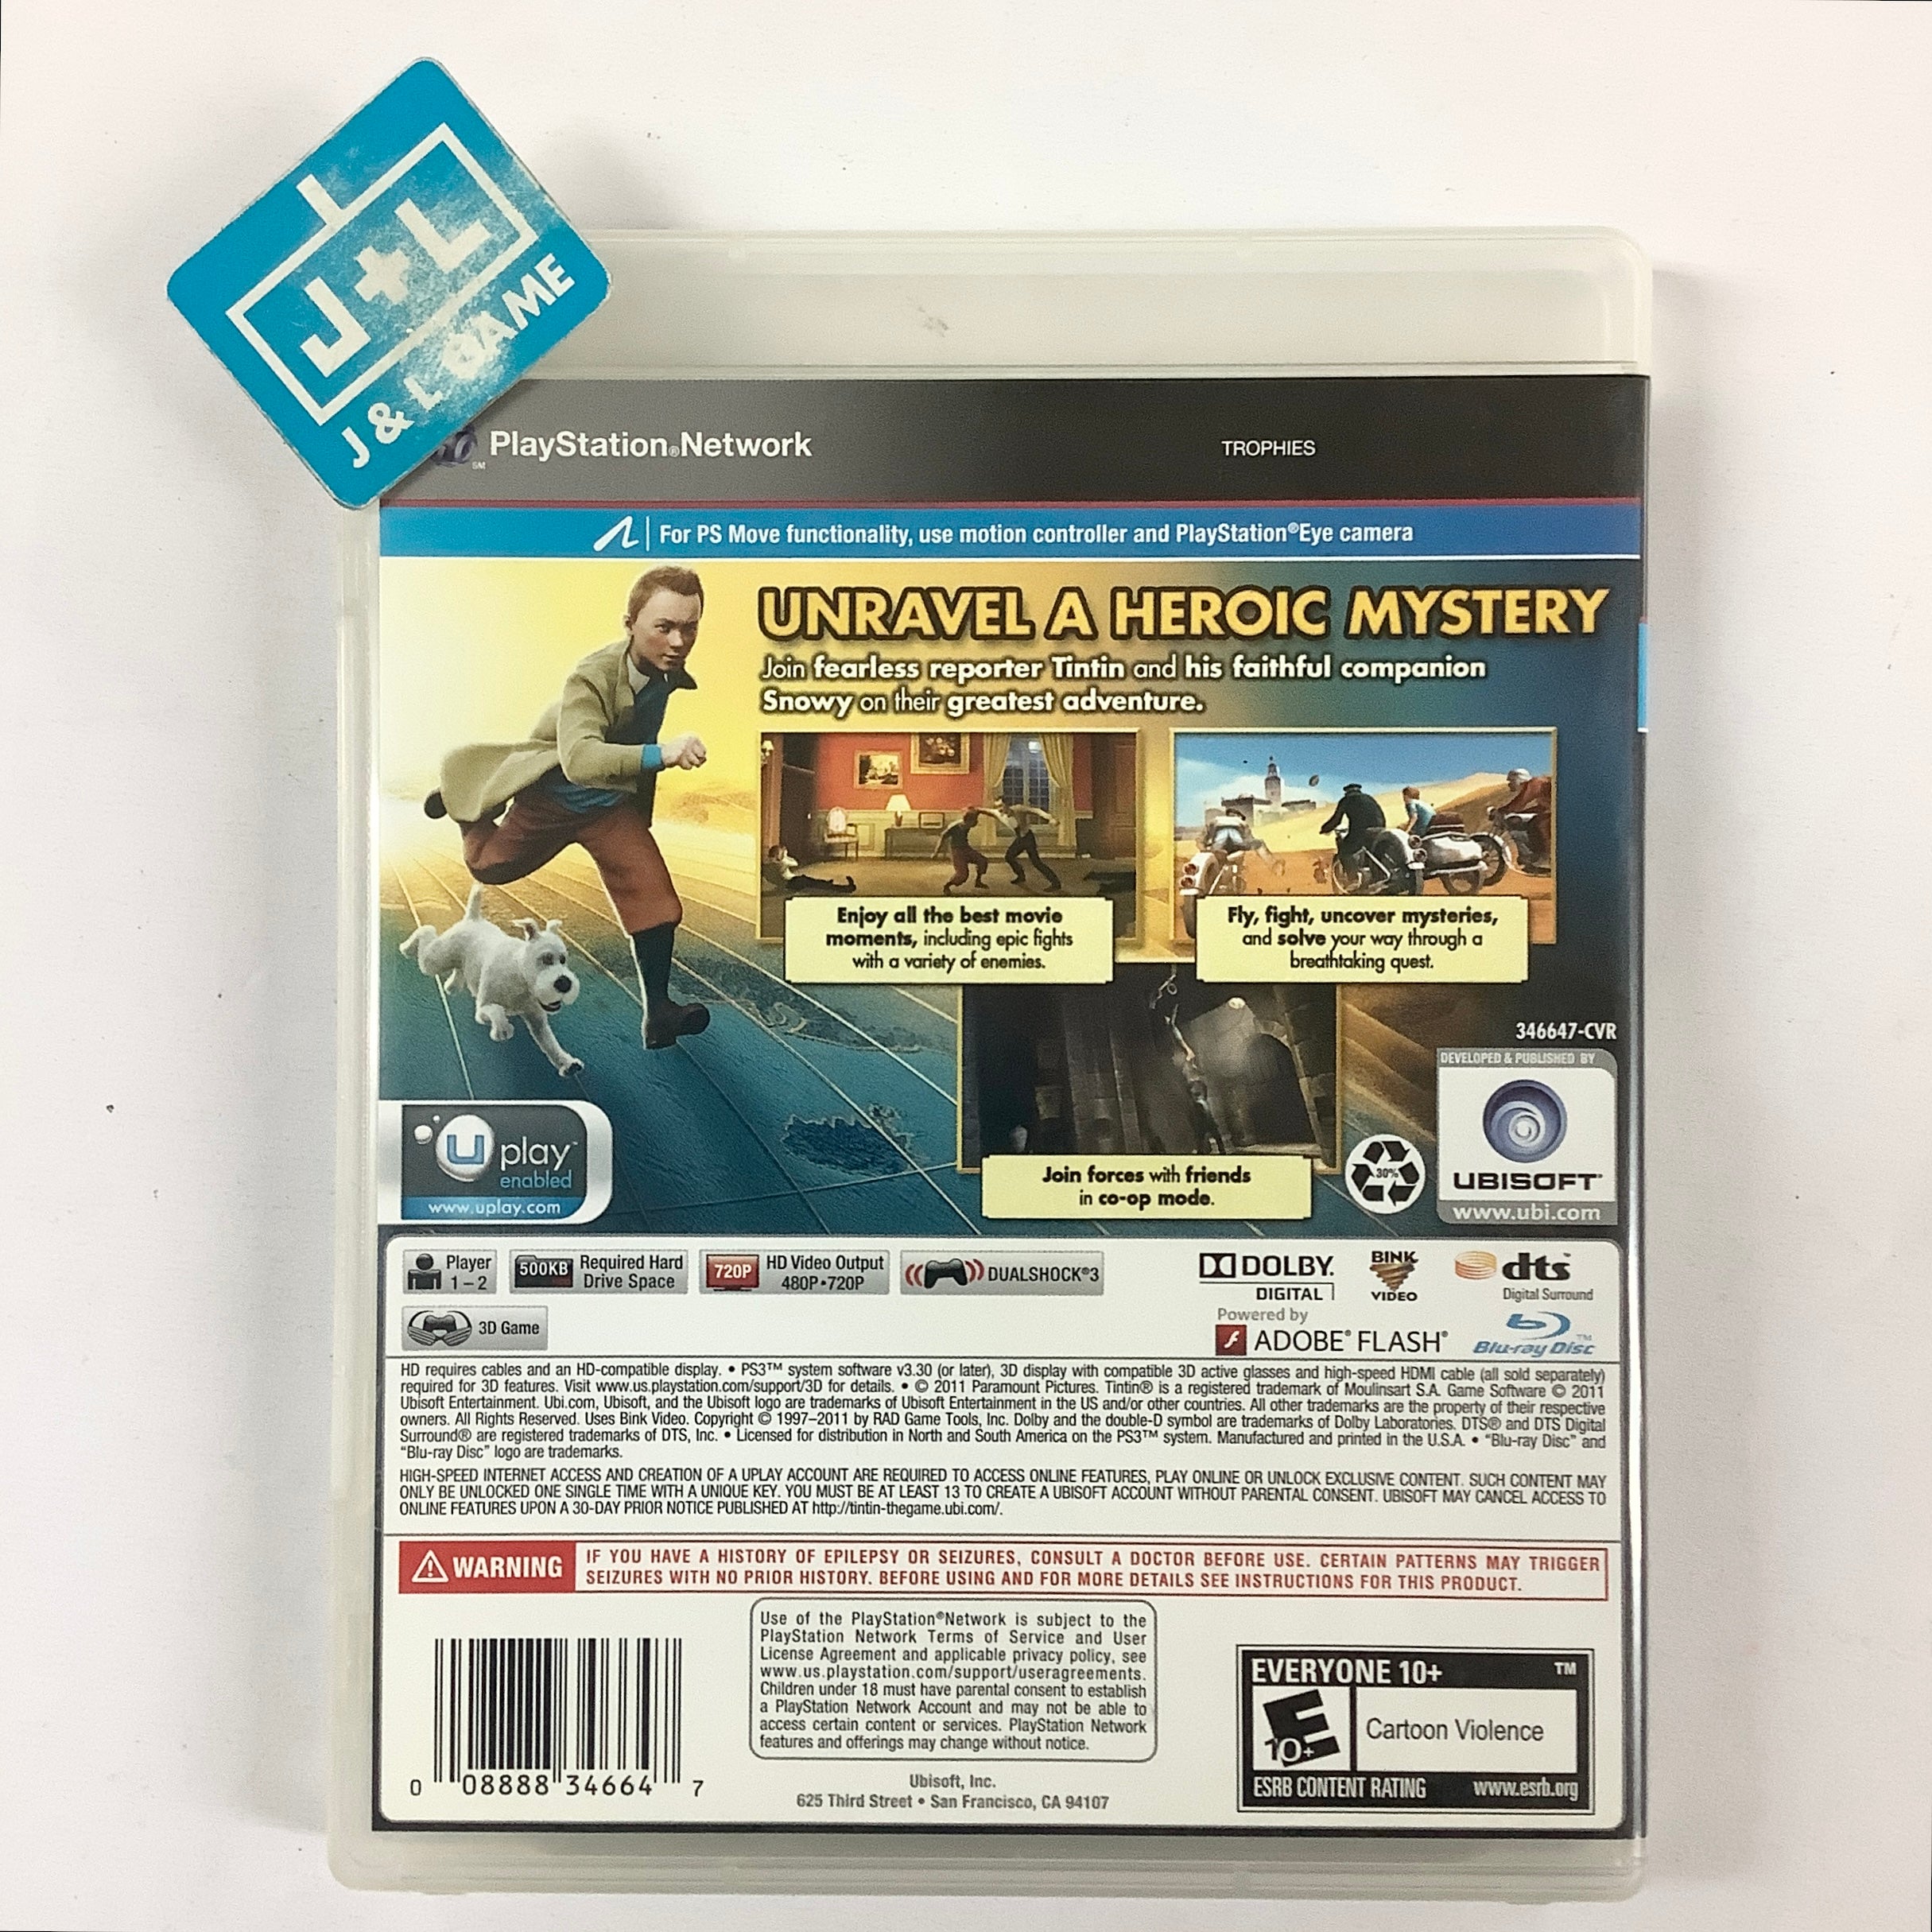 The Adventures of Tintin: The Game - (PS3) PlayStation 3 [Pre-Owned] Video Games Ubisoft   